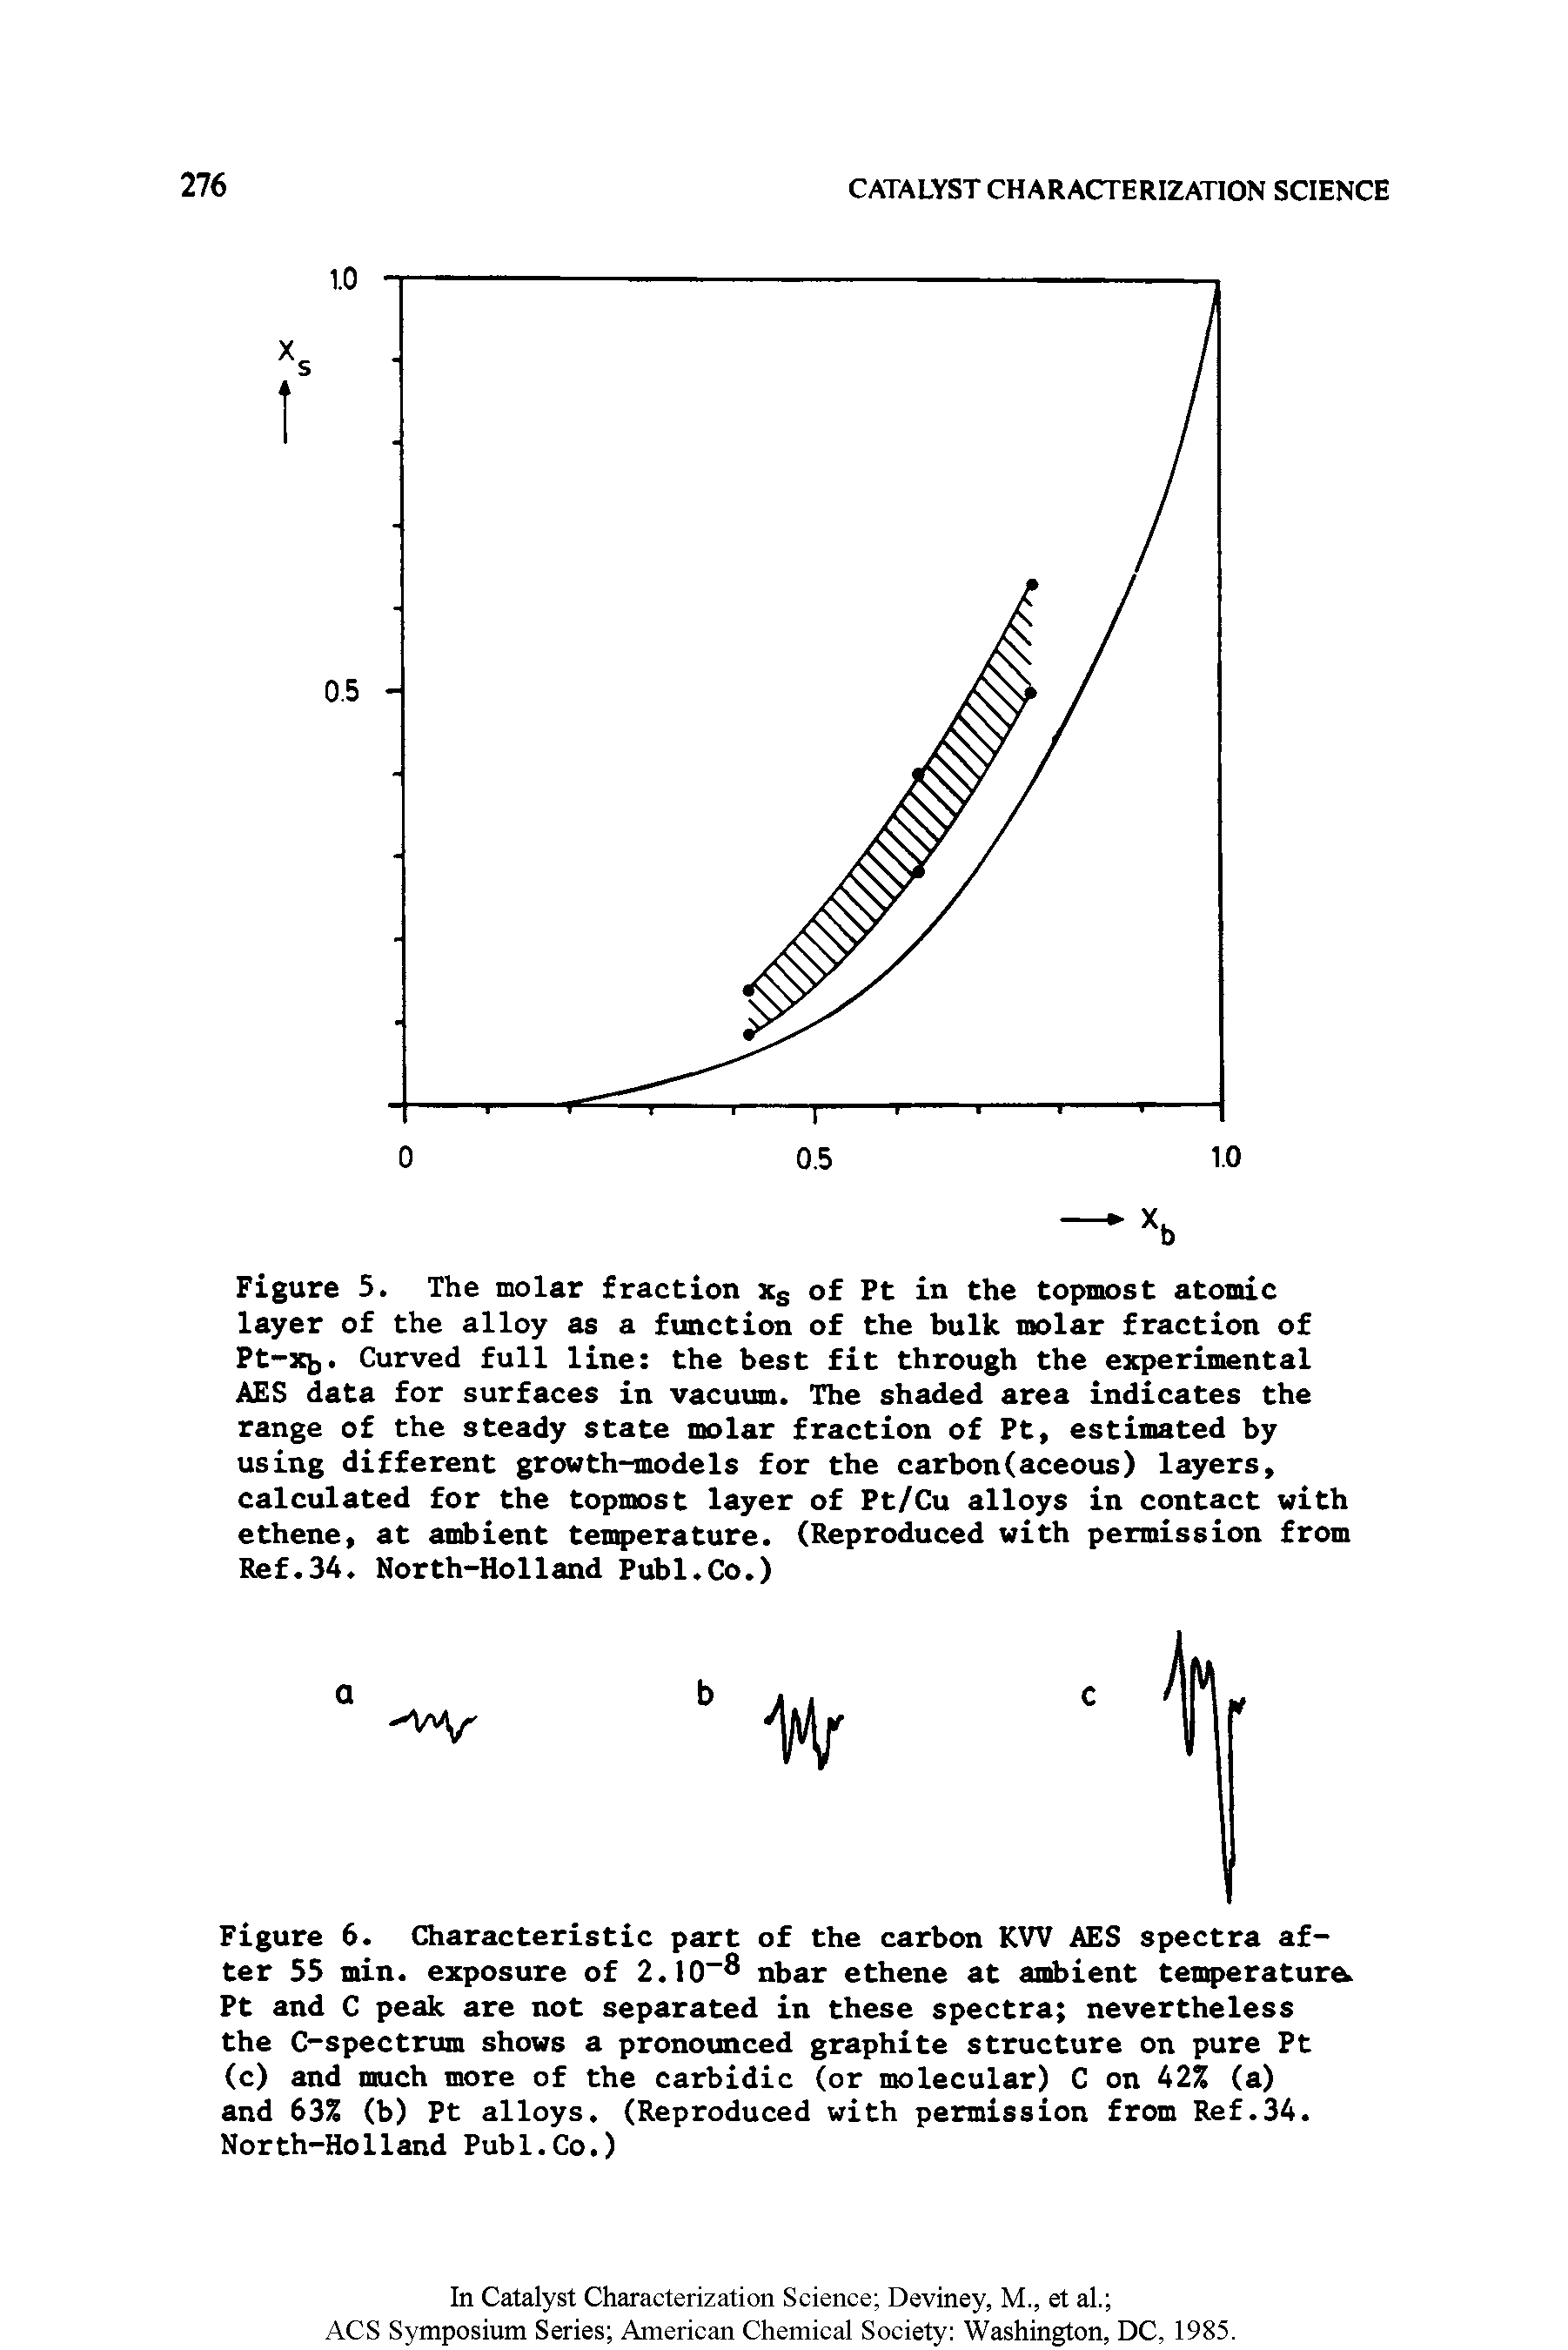 Figure 5. The molar fraction Xg of Pt in the topmost atomic layer of the alloy as a function of the bulk molar fraction of Pt-Xb. Curved full line the best fit through the experimental AES data for surfaces in vacuum. The shaded area indicates the range of the steady state molar fraction of Pt, estimated by using different growth-models for the carbon(aceous) layers, calculated for the topmost layer of Pt/Cu alloys in contact with ethene, at ambient temperature. (Reproduced with permission from Ref.34. North-Holland Publ.Co.)...